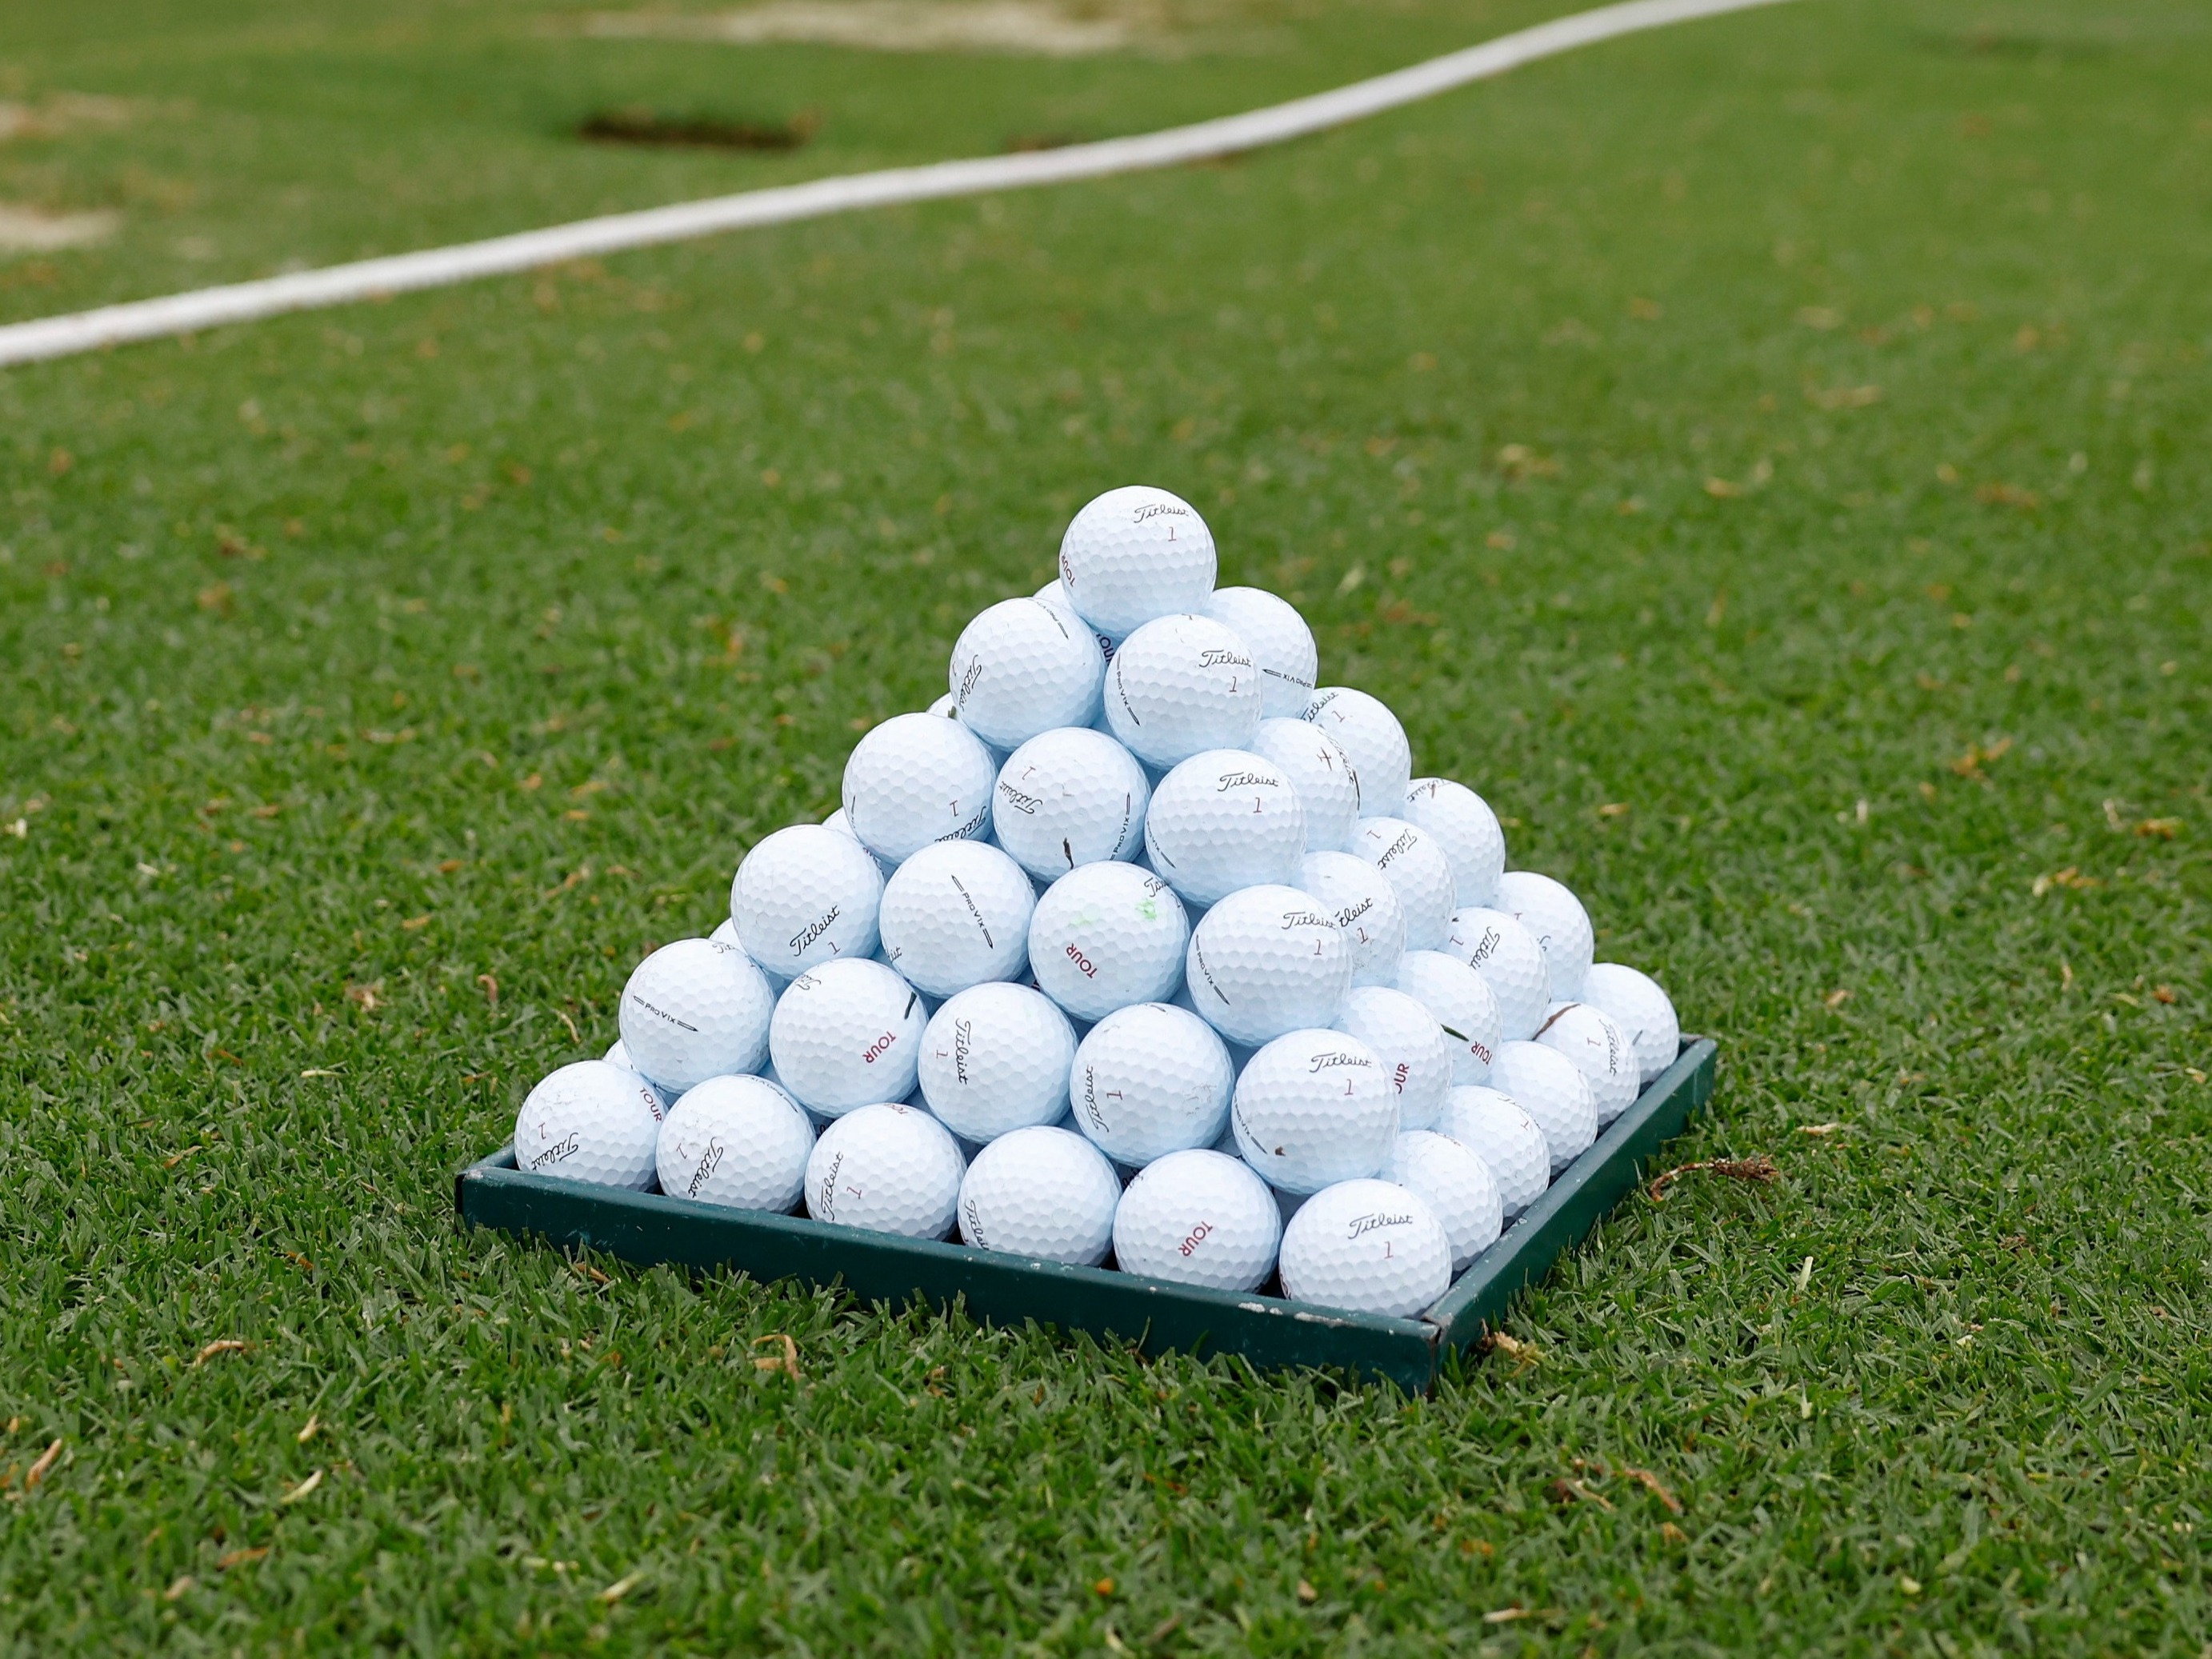 Statement: Revision of golf ball testing conditions